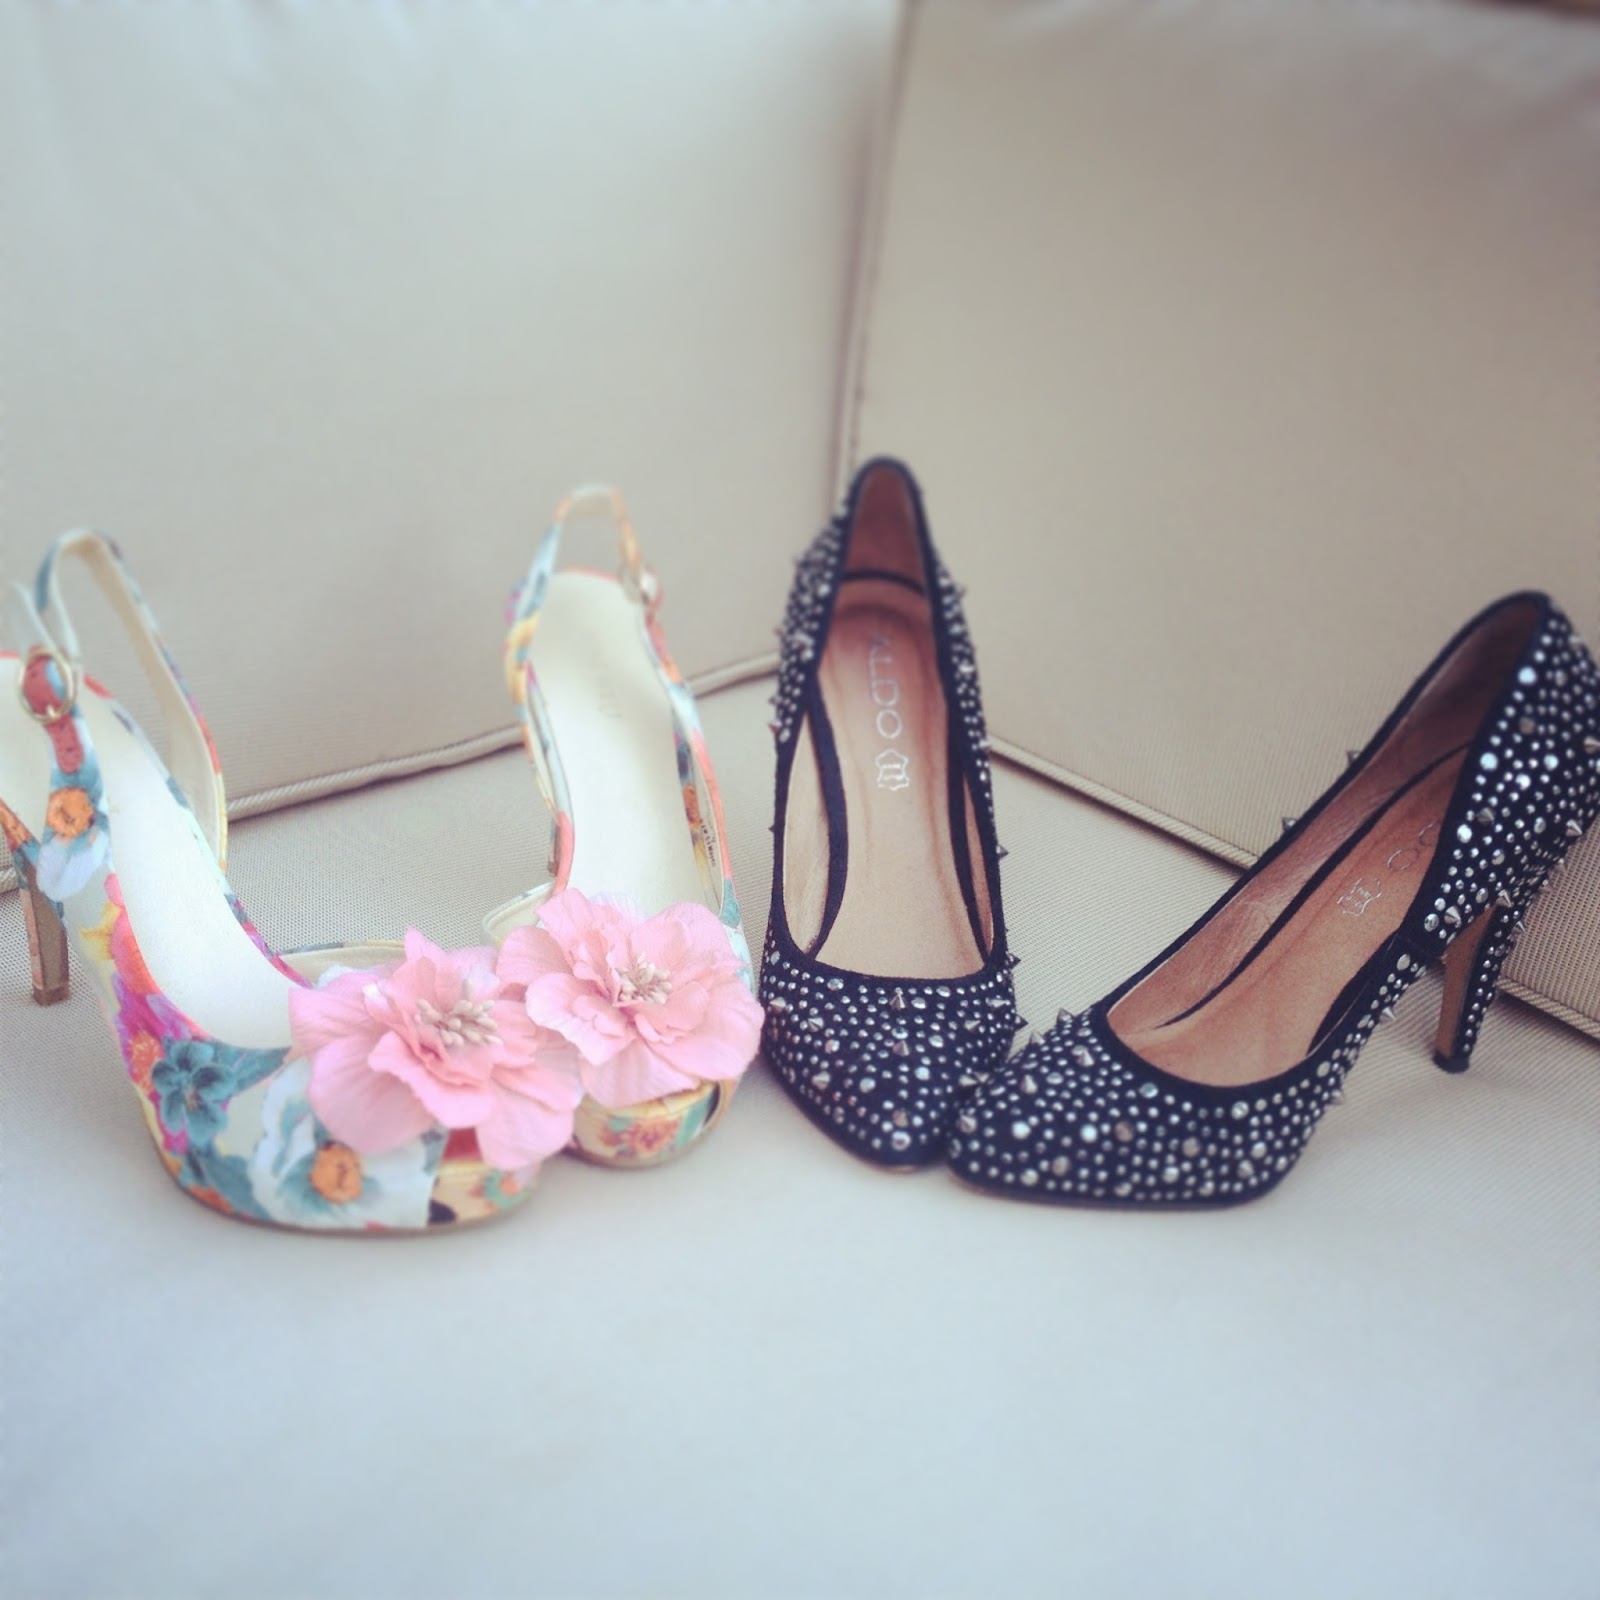 Life Cravings: For The Love Of Shoes!